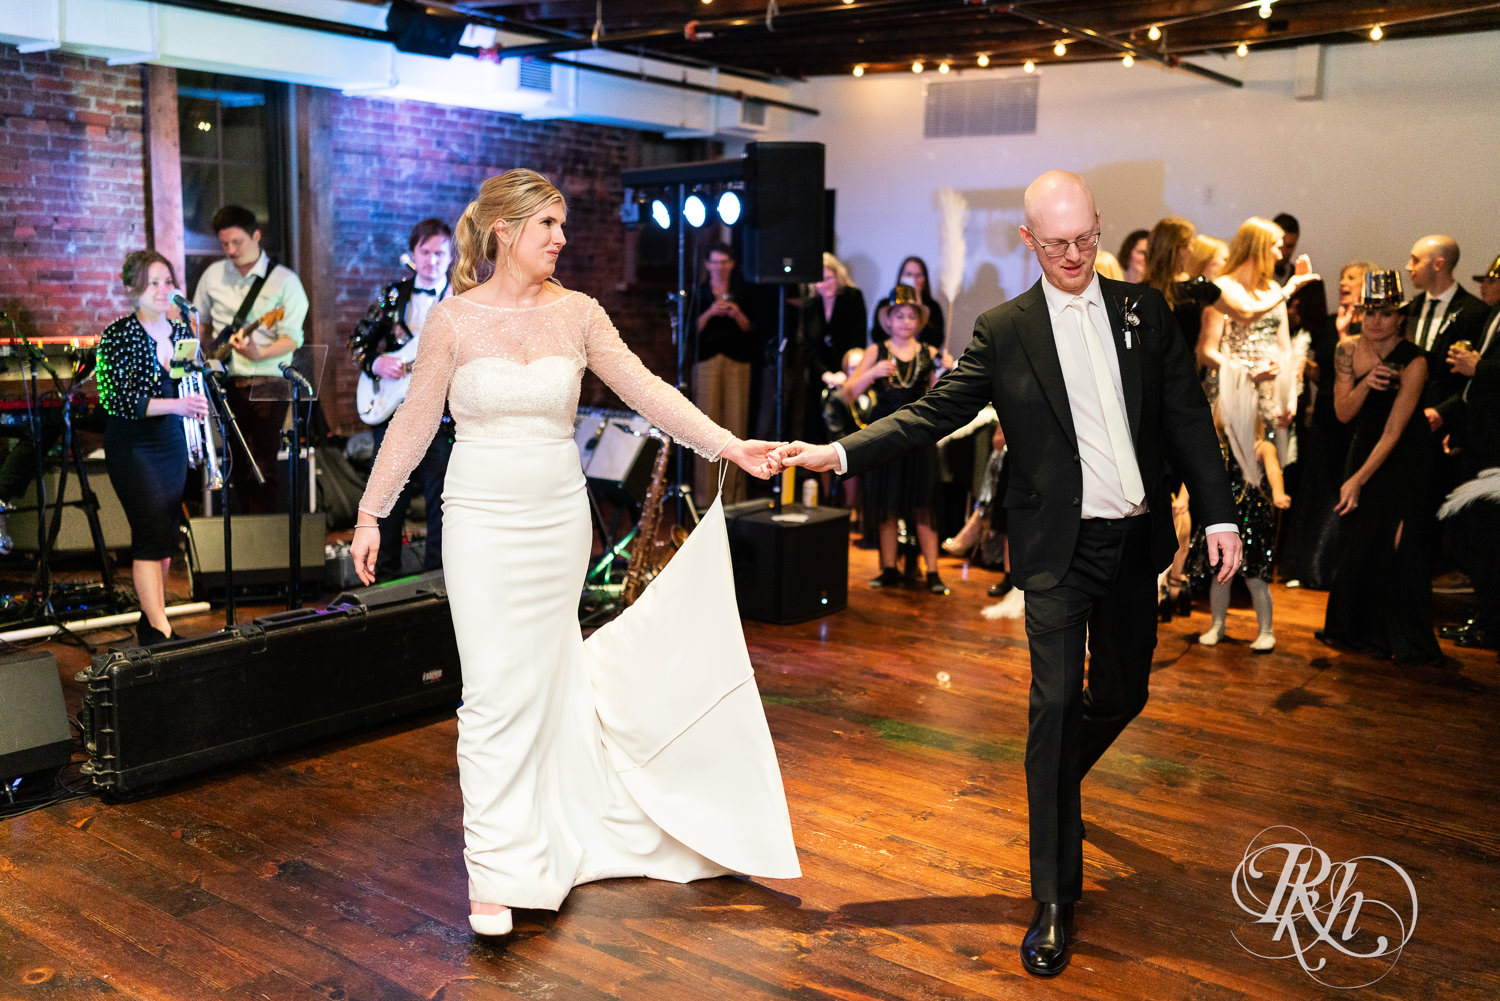 Bride and groom have first dance during wedding reception at Gatherings at Station 10 in Saint Paul, Minnesota.